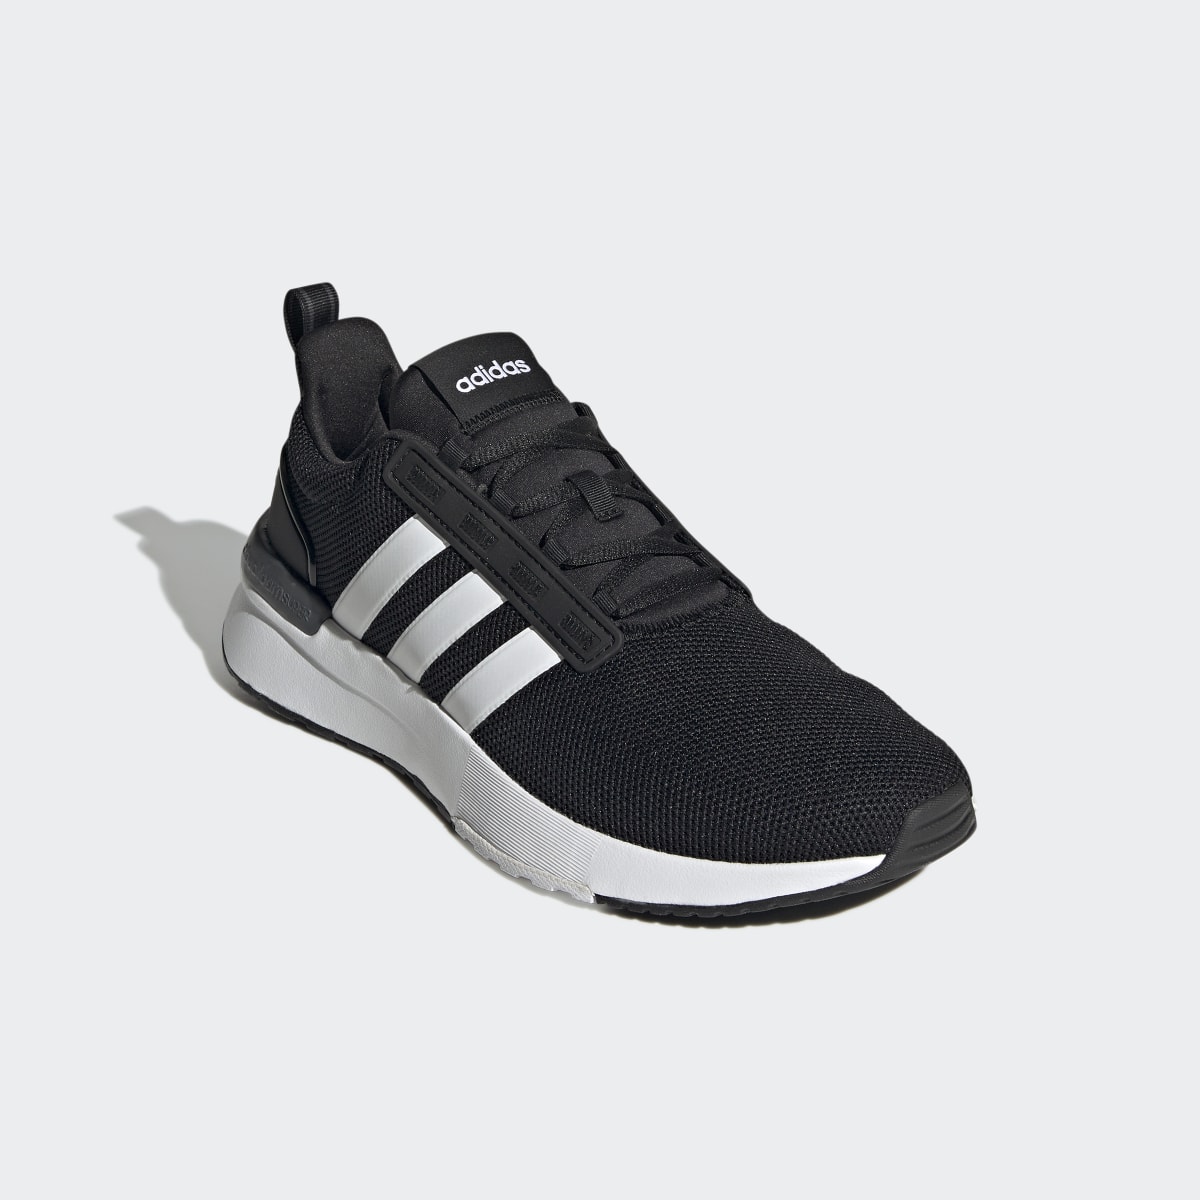 Adidas Chaussure Racer TR21 Wide. 5